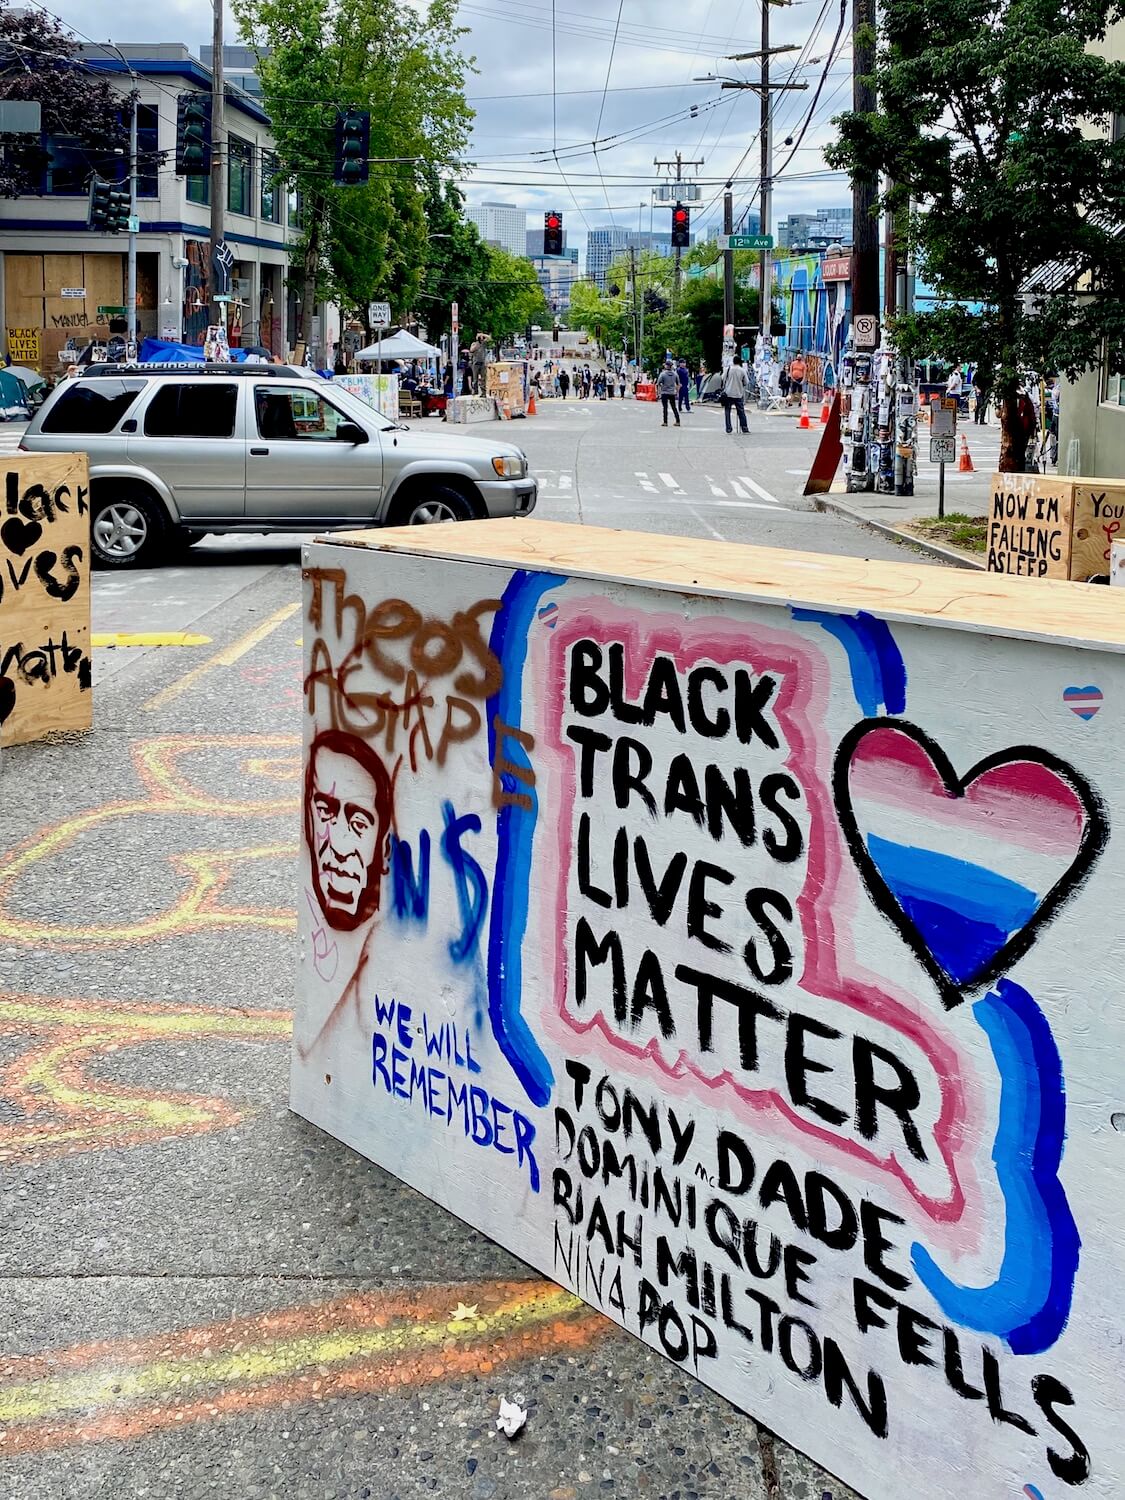 Signage at the CHOP area of Seattle during the Black Lives Matter protest. The colors are a bright mix of blues and greens and this sign says, Black Trans Lives Matter, with the list of four names of those trans people killed by police.